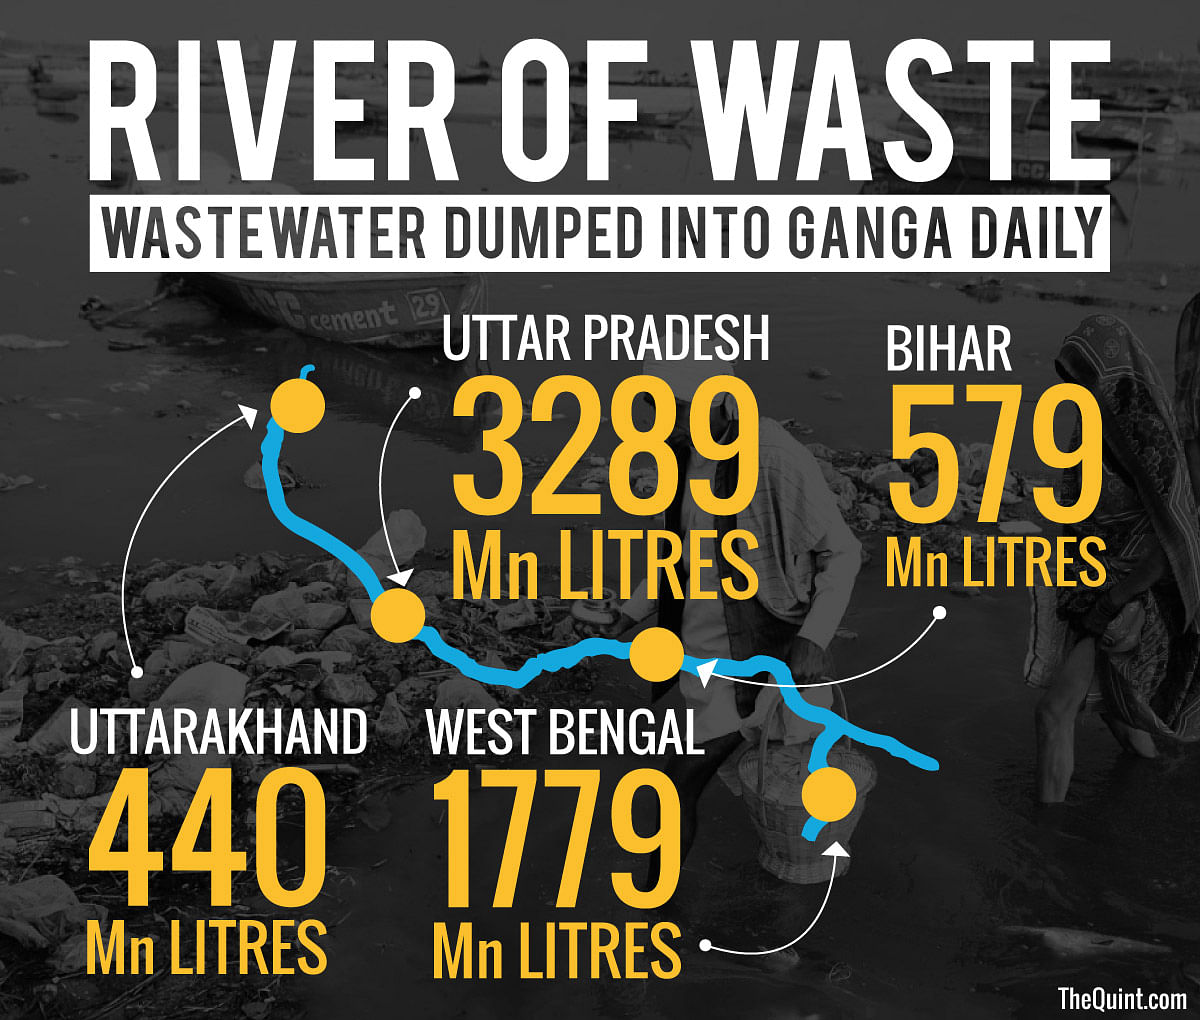 The Ganga hosts more than 40% of India’s population, and the progress the clean-up is making is dangerously slow.